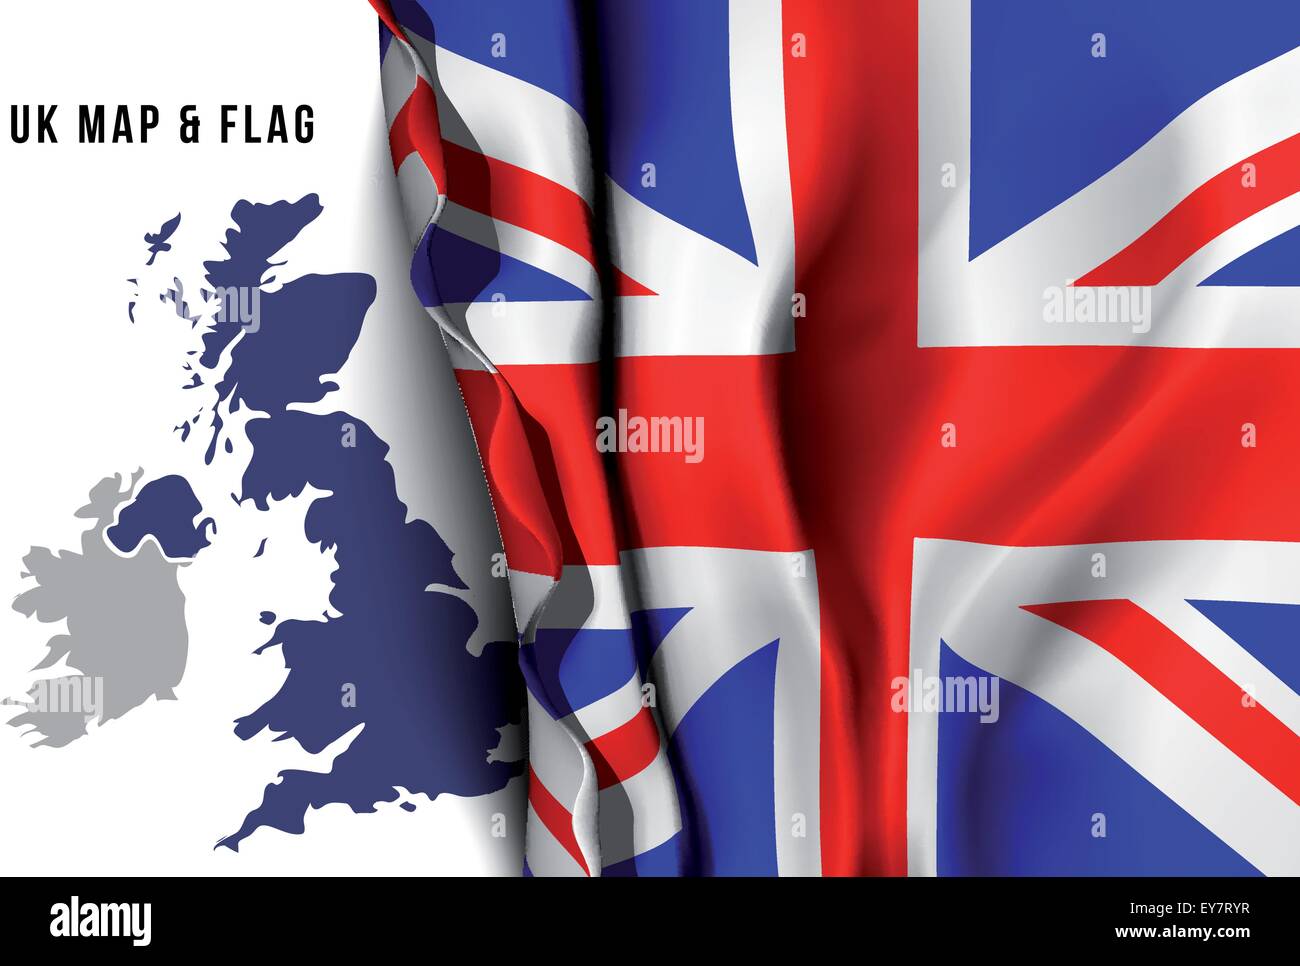 United Kingdom map and flag Stock Vector